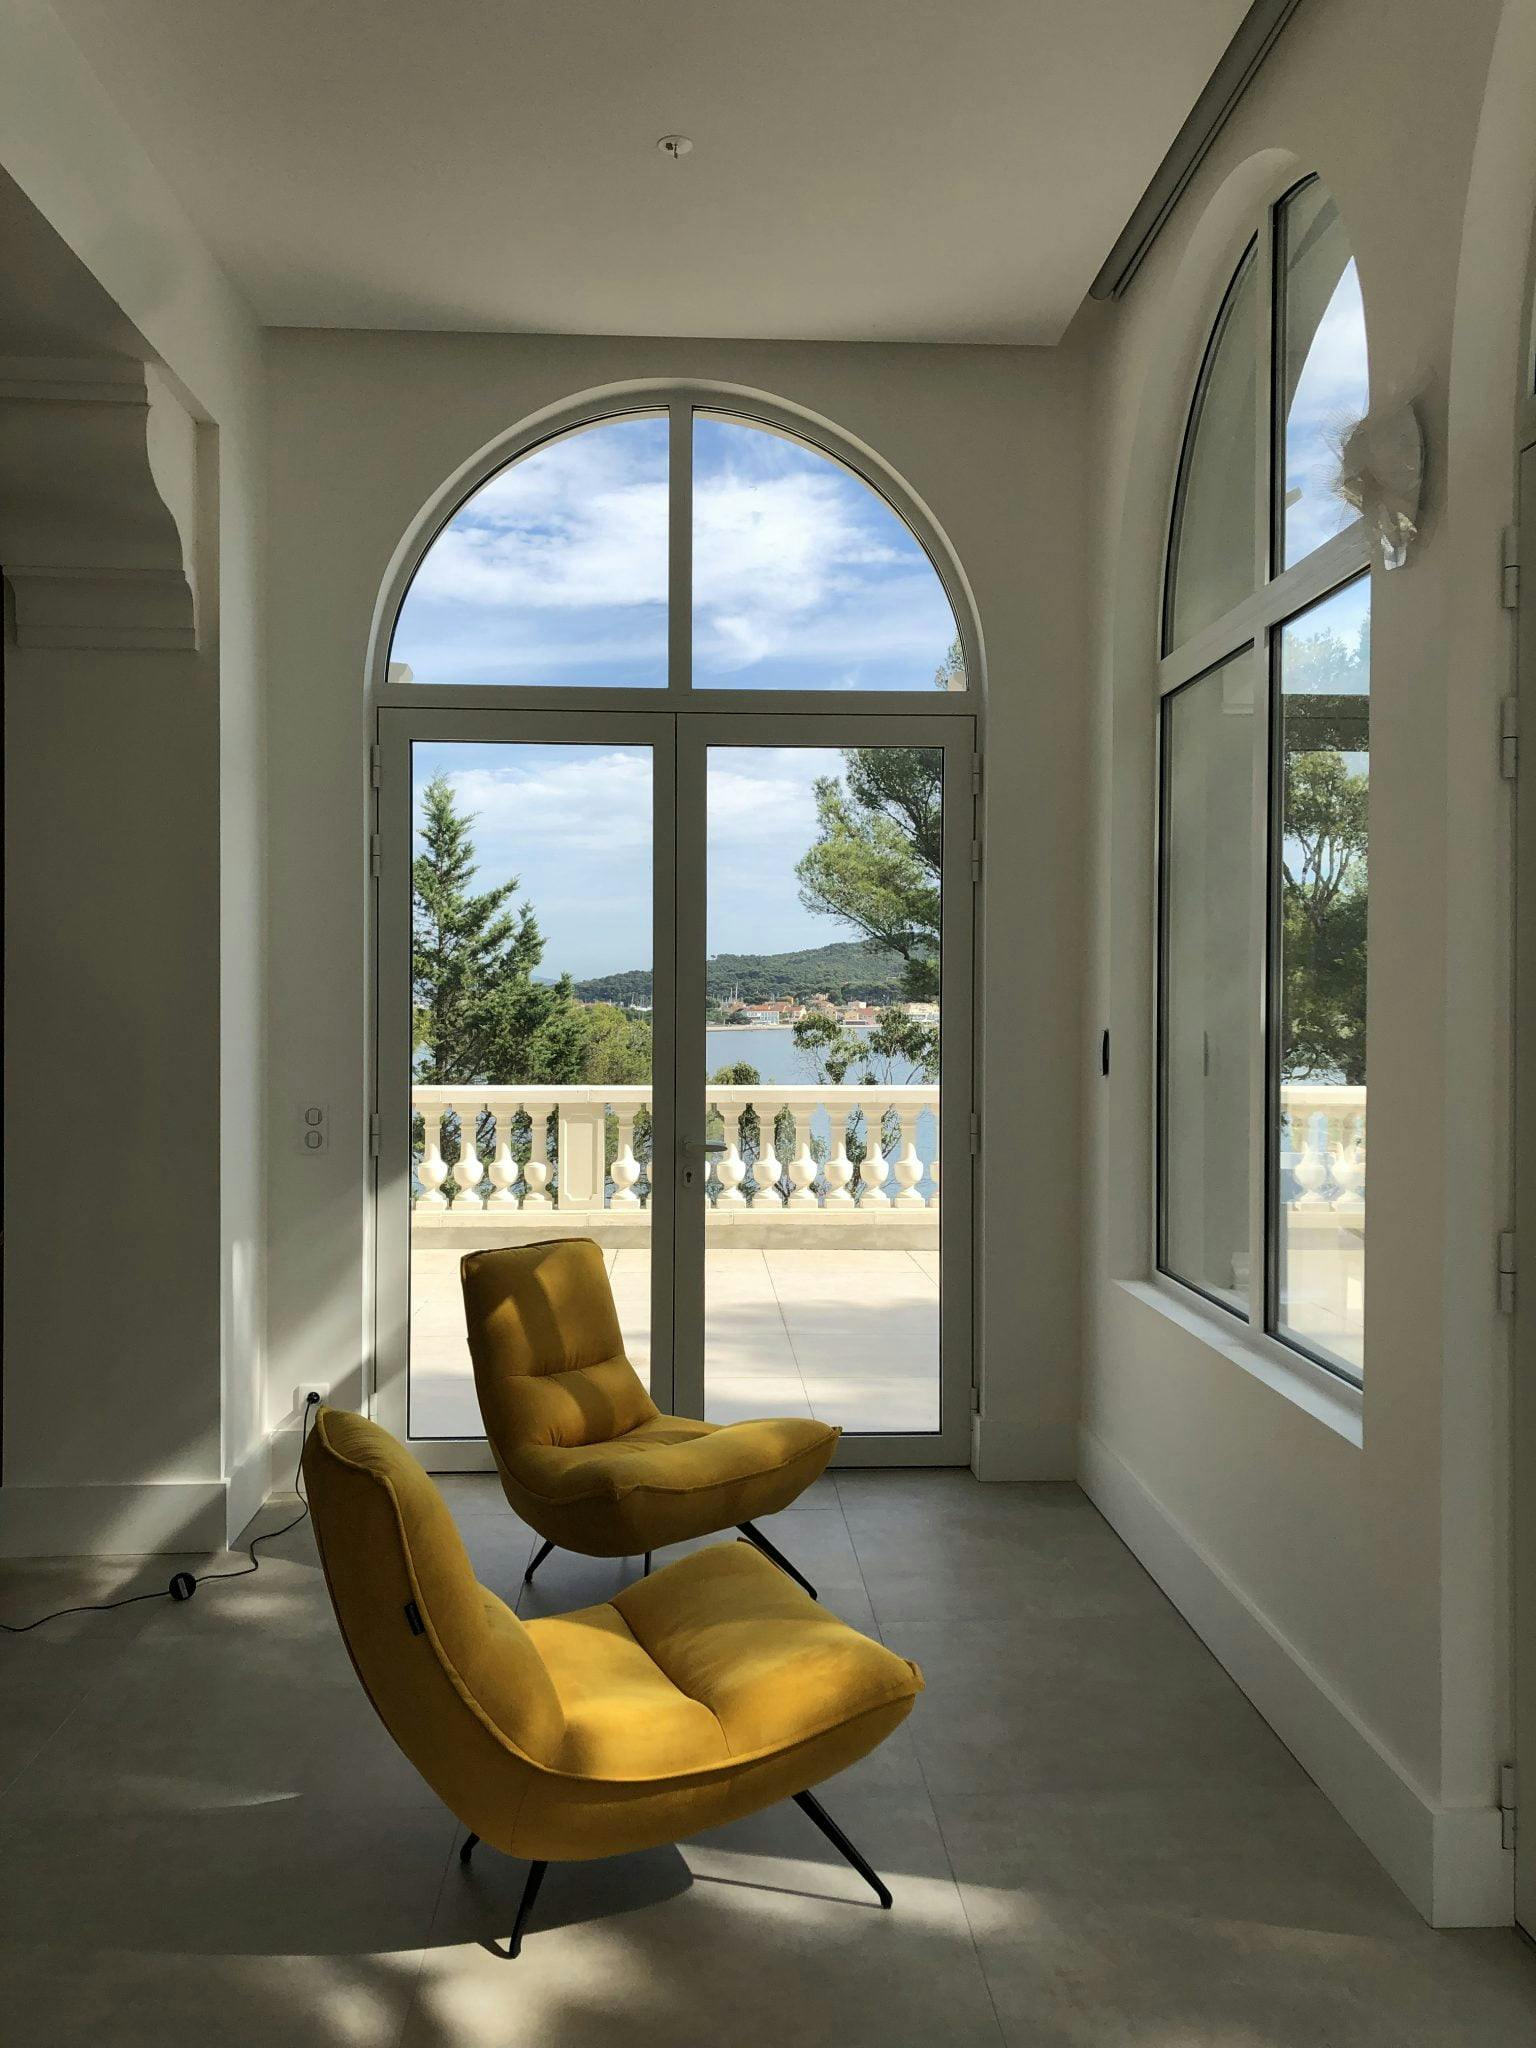 Mustard yellow armchair and large arched window